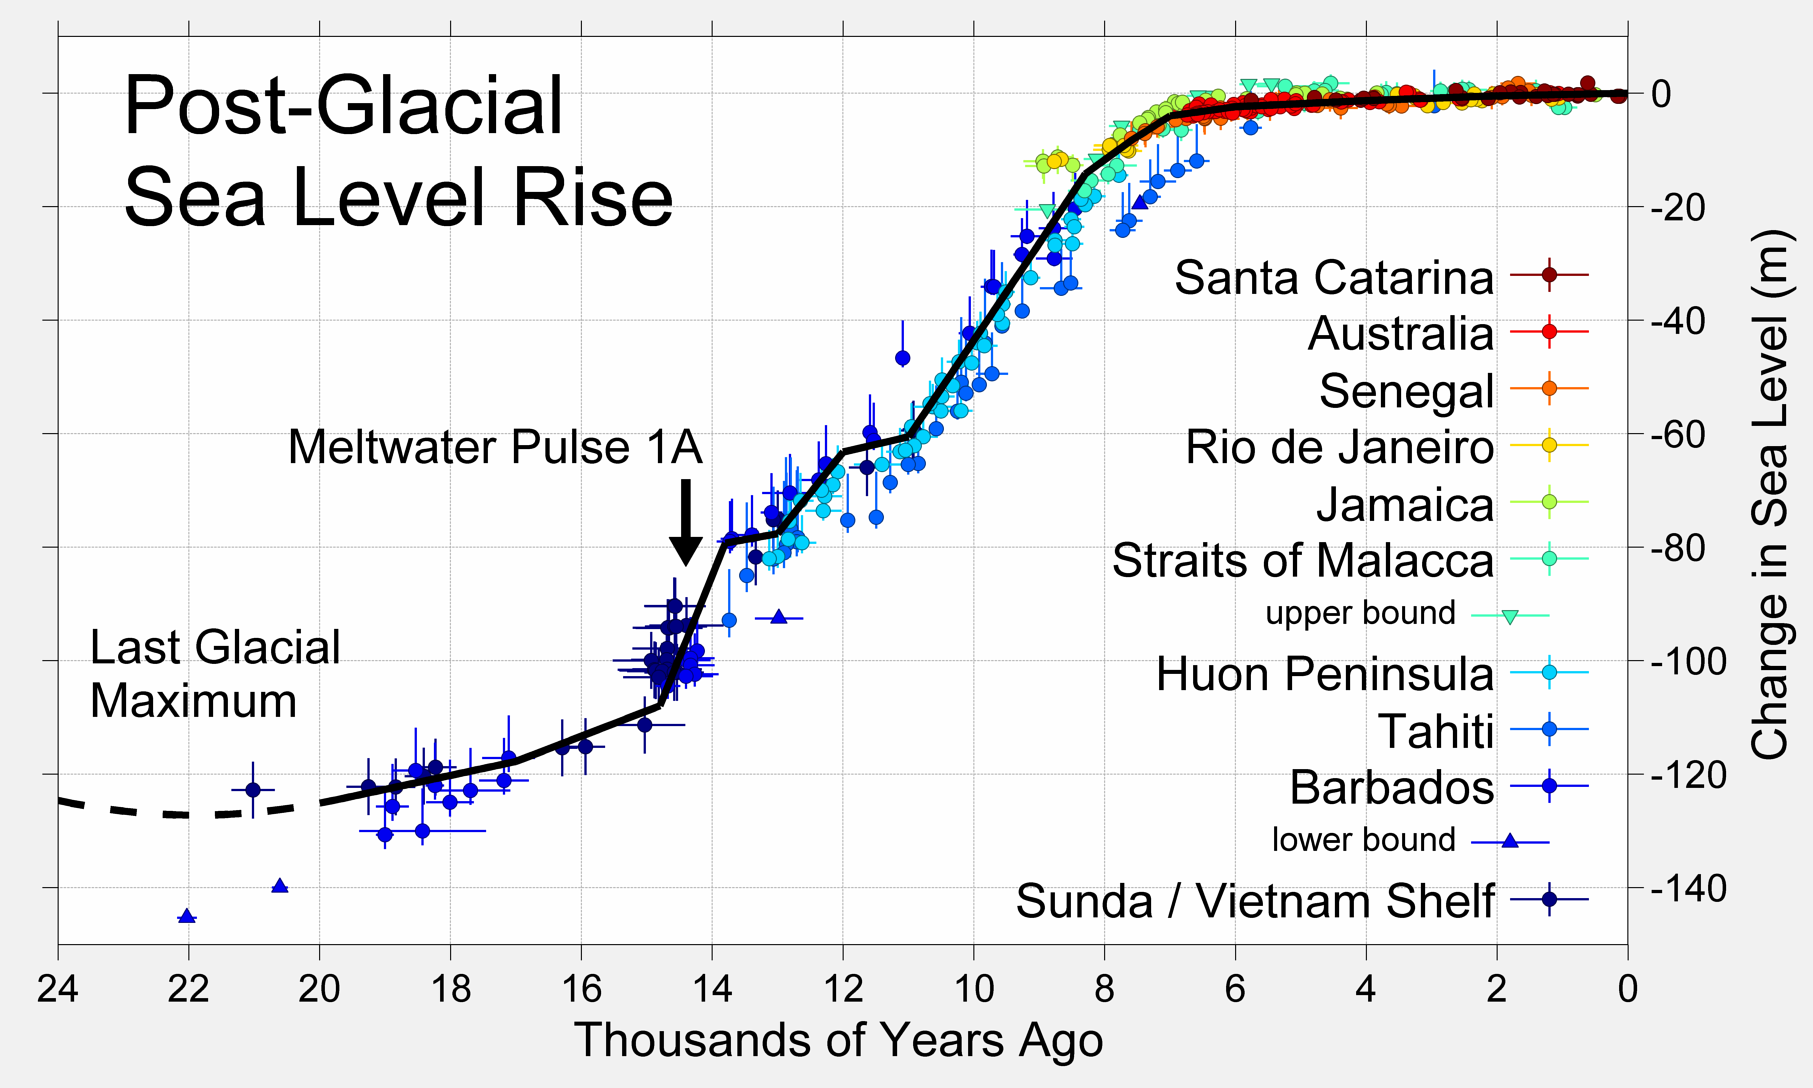 History refutes the climate alarmists' claims about sea levels